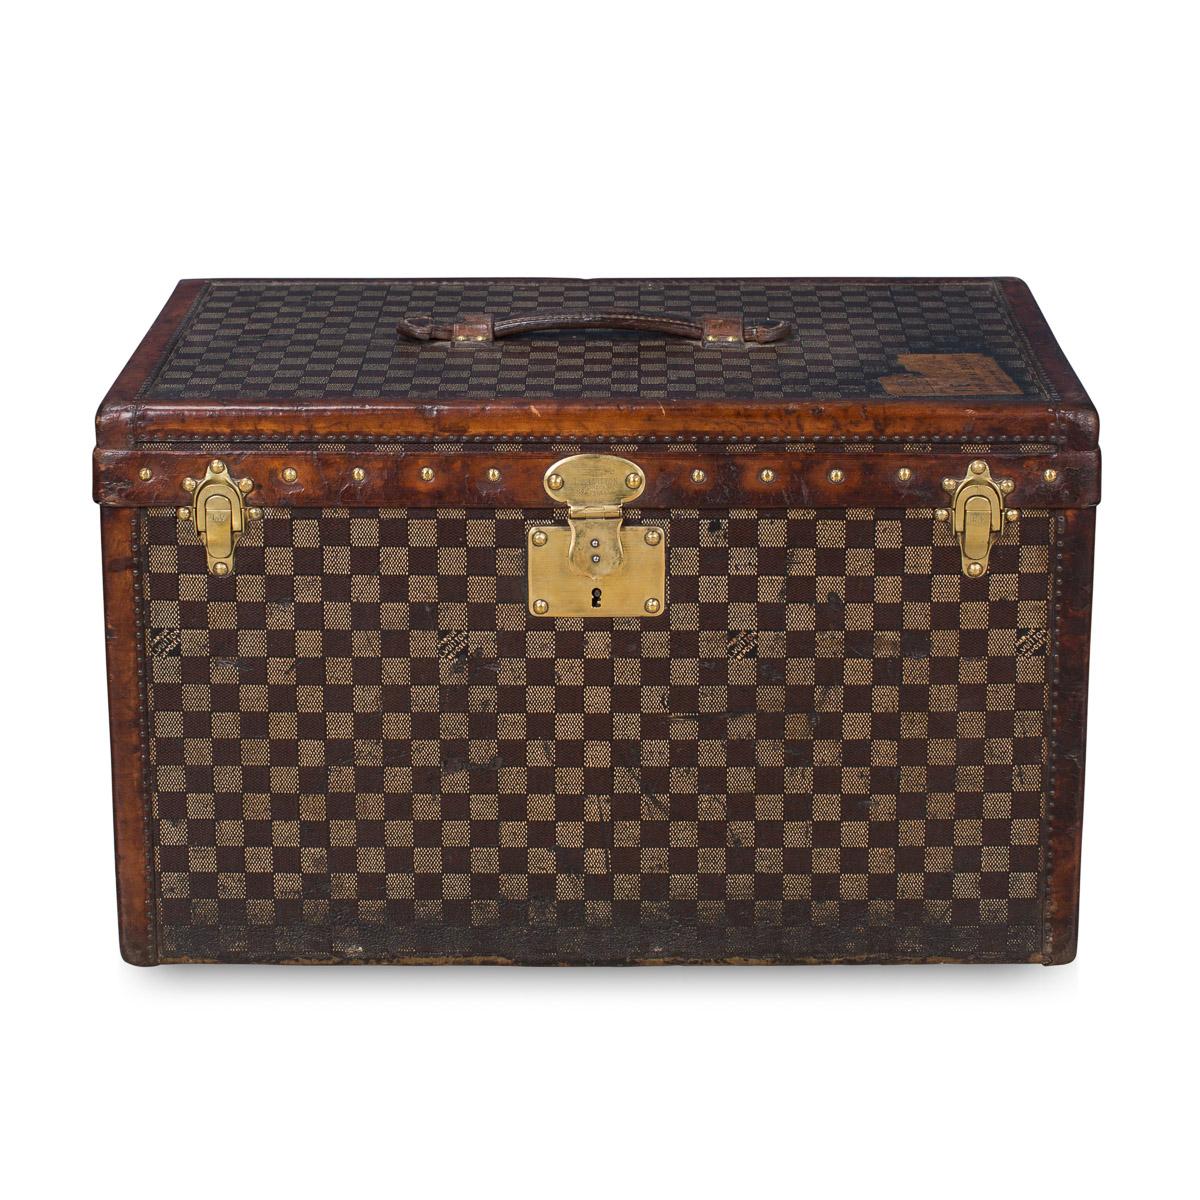 One of the rarest trunks ever produced by the world famous trunk maker Louis Vuitton. Covered in the recognisable 